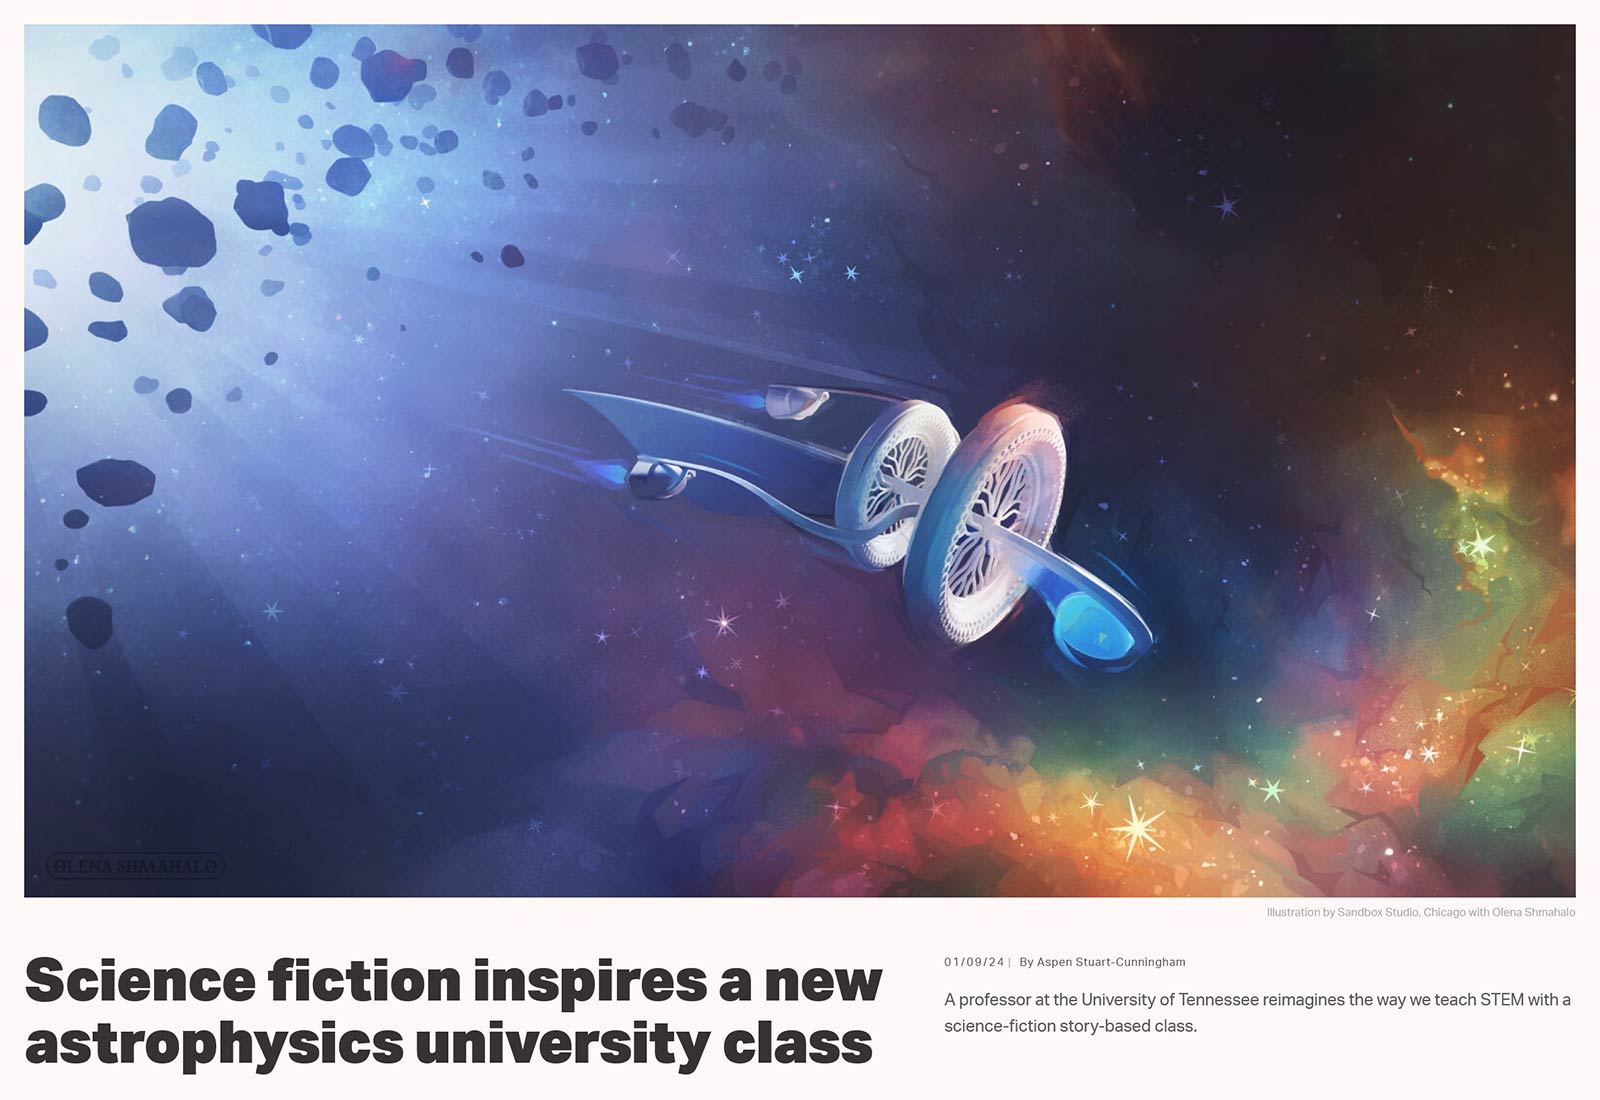 Screenshot: Digital painting of a starship flying out of an asteroid field and into a colorful molecular cloud. Art by Olena Shmahalo for Symmetry Magazine. Title text below the illustration reads 'Science fiction inspires a new astrophysics university class', subhead: 'A professor at the University of Tennessee reimagines the way we teach STEM with a science-fiction story-based class.' 01/09/24 By Aspen Stuart-Cunningham